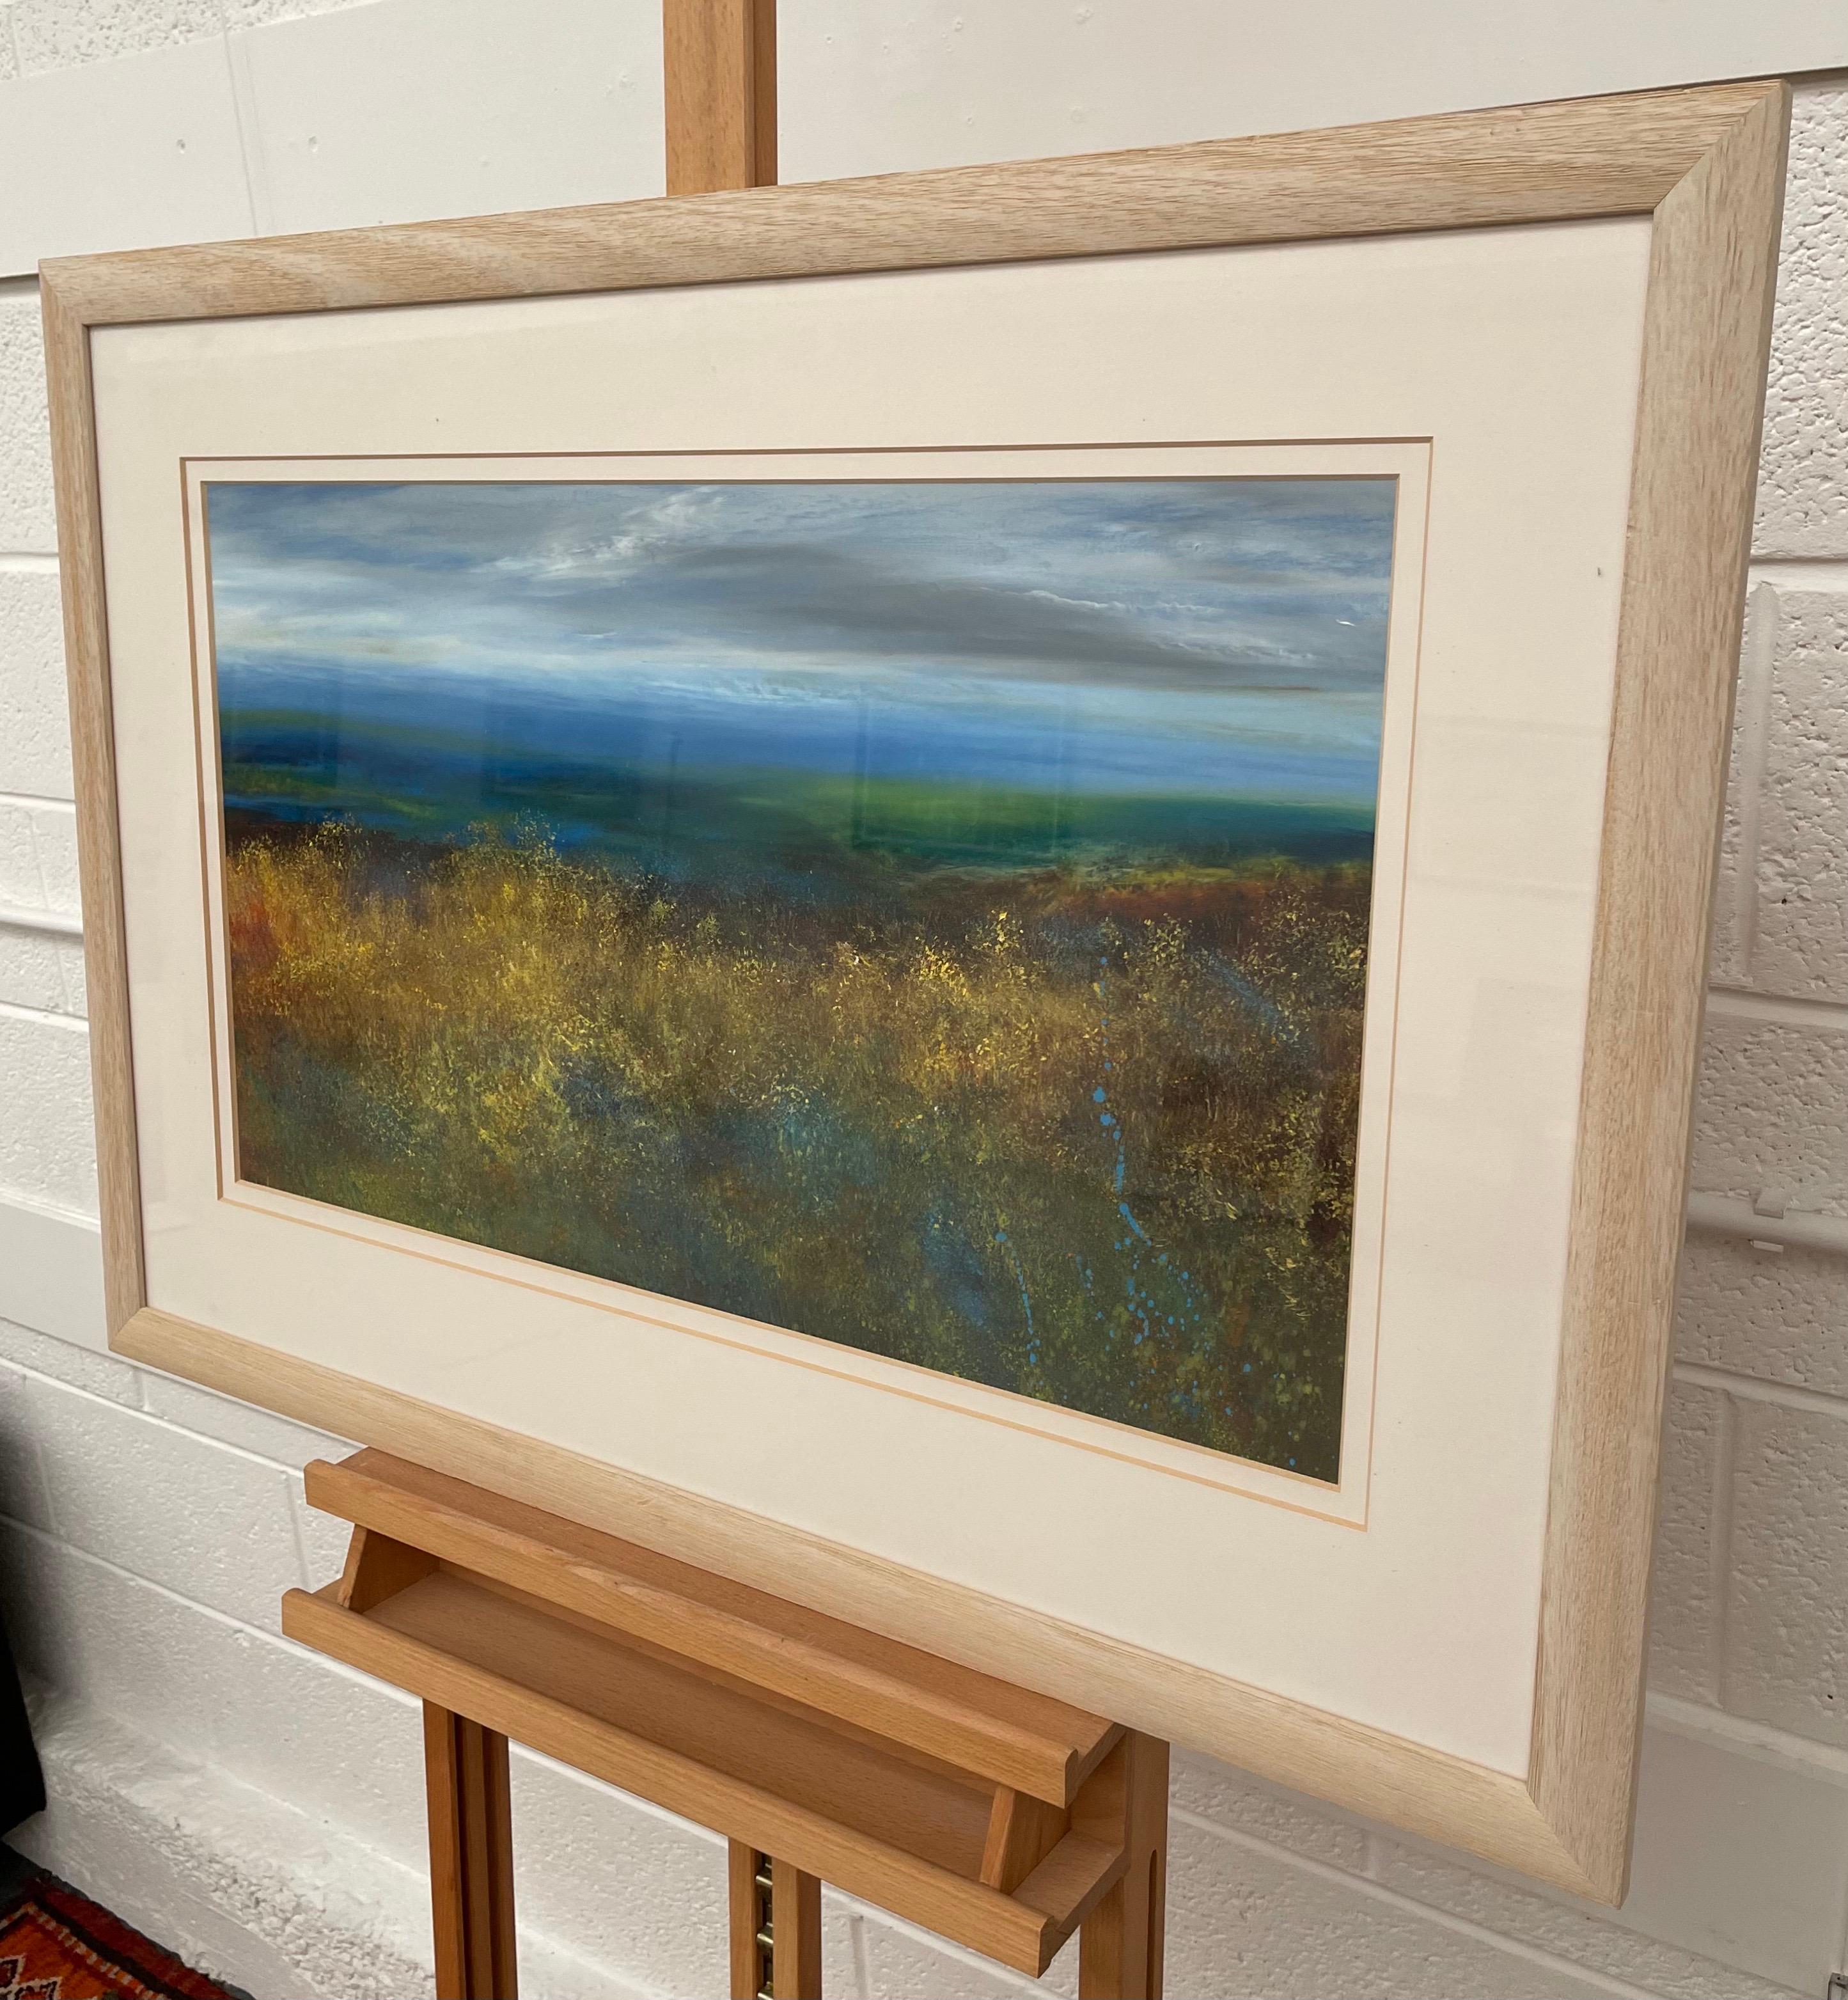 British Landscape Painting of Cornish Moorland by Contemporary Seascape Artist, Amanda Hoskin. 
Original oil on board, 2002. Signed, dated and titled on rear. Presented in a cream coloured frame with double mount. 

Art measures 27 x 16 inches
Frame